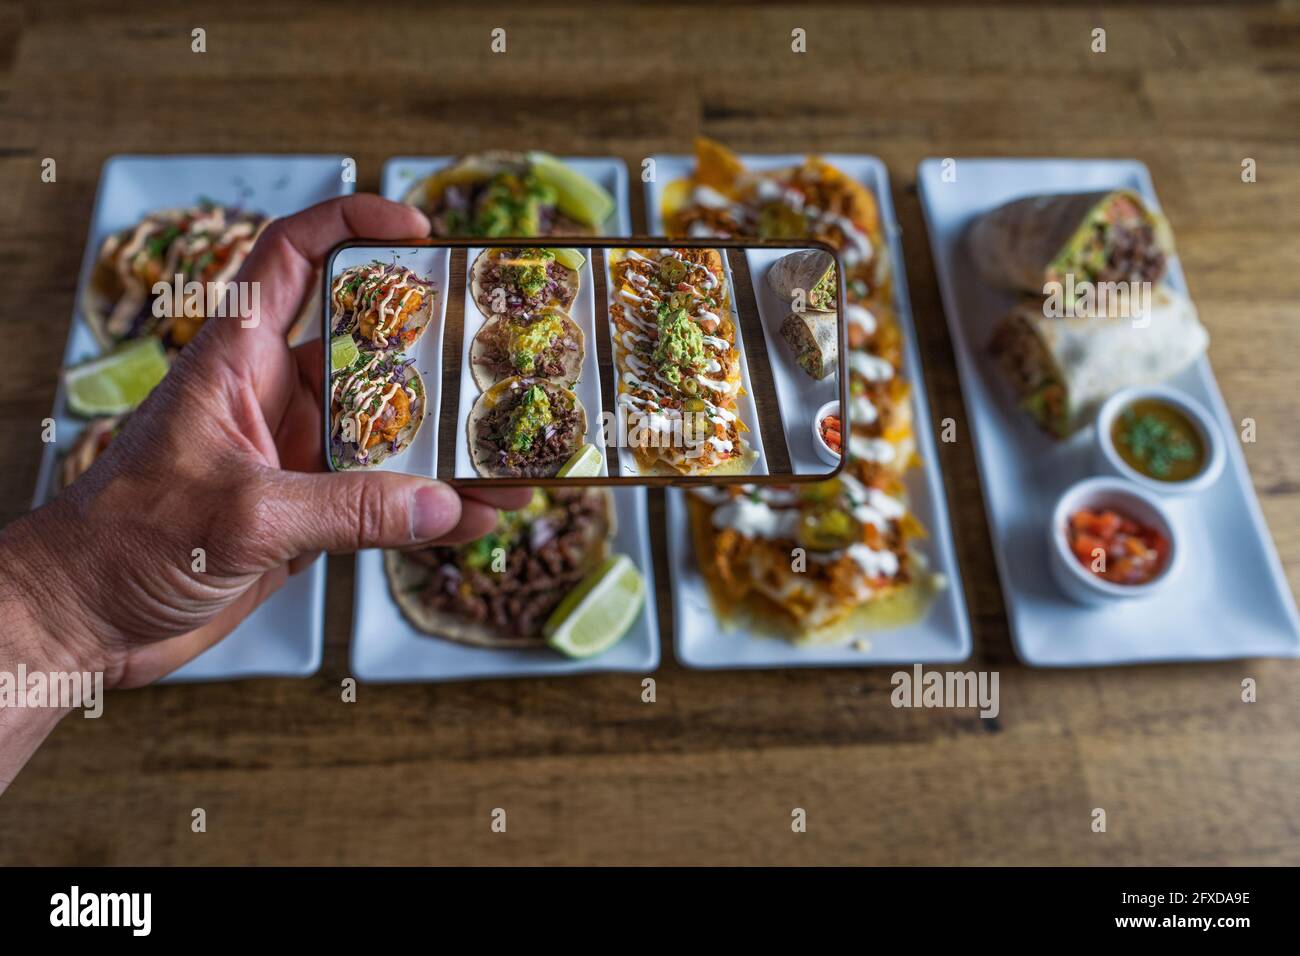 Man takes a photo of Mexican food dishes on the restaurant table Stock Photo